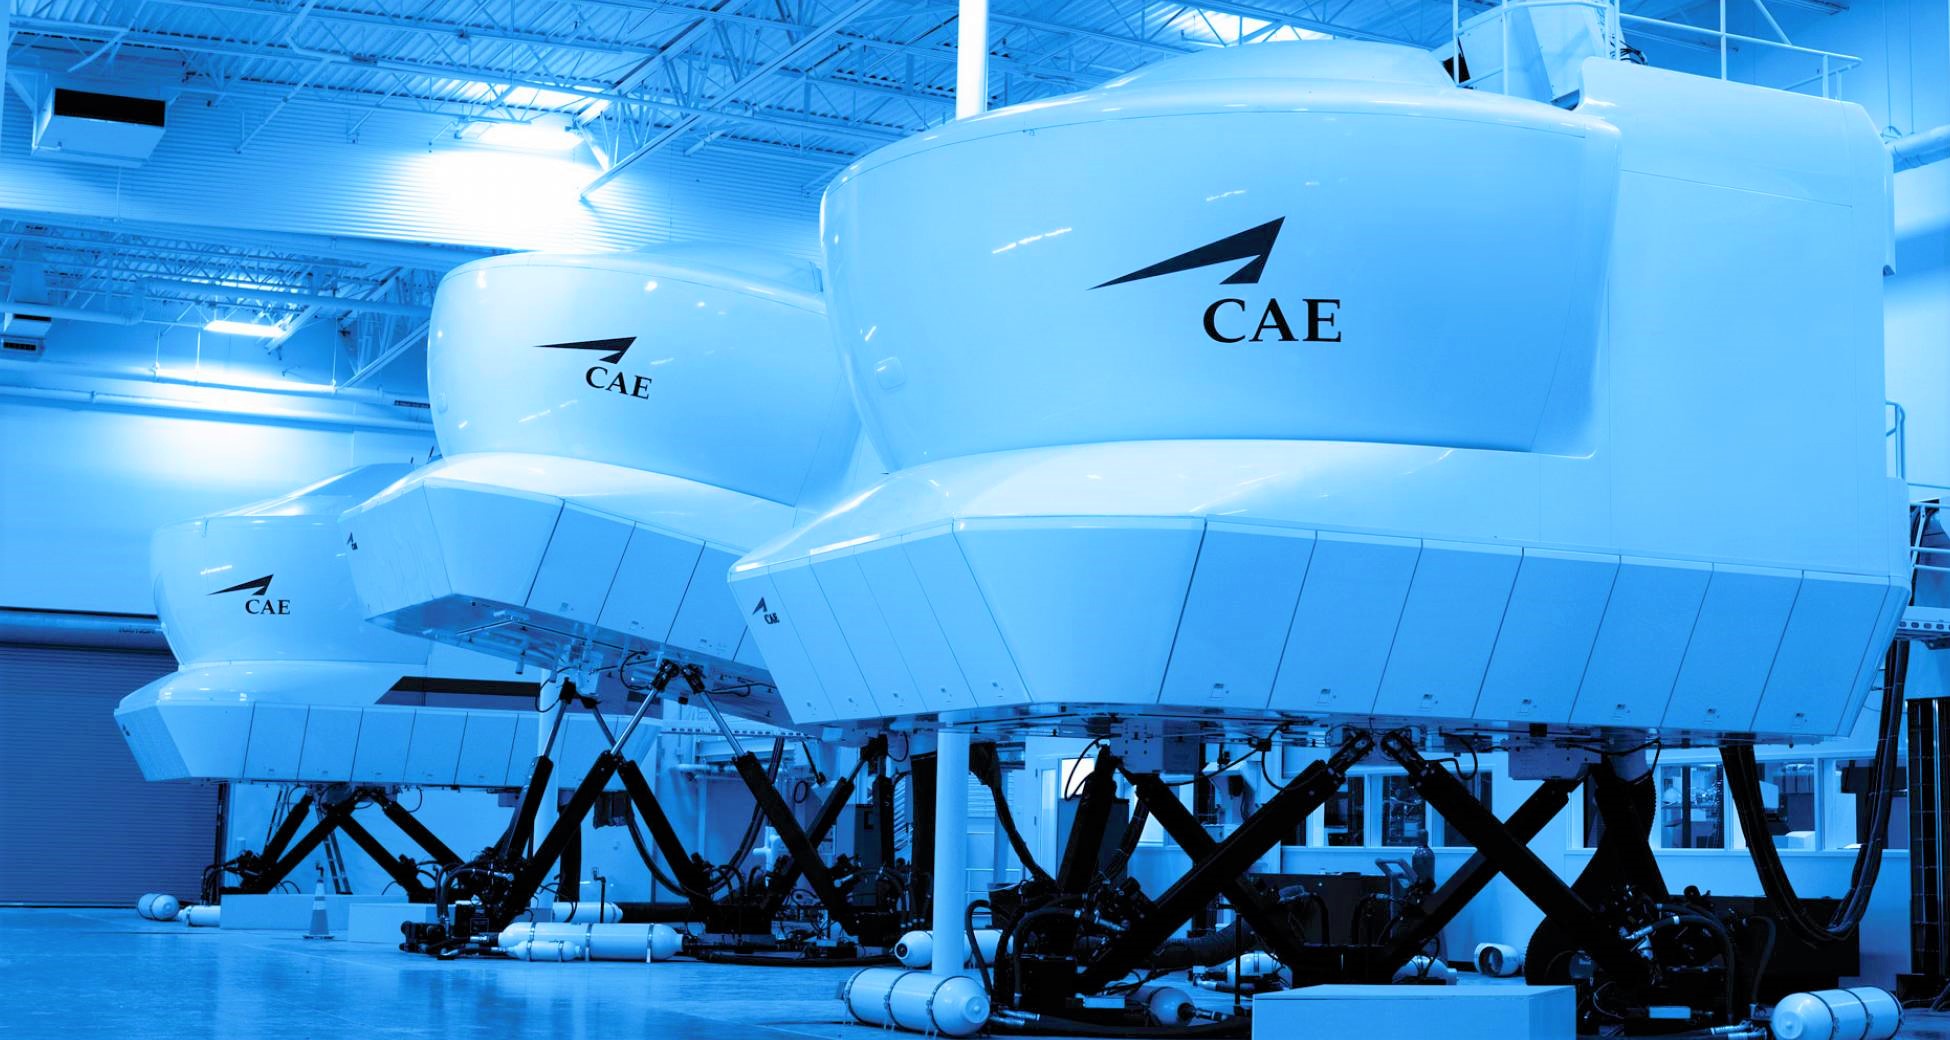 Job opening Alert - CAE  and  CAE Parc Aviation  are  looking  to  recruit  for  below  posts  at  different  locations.